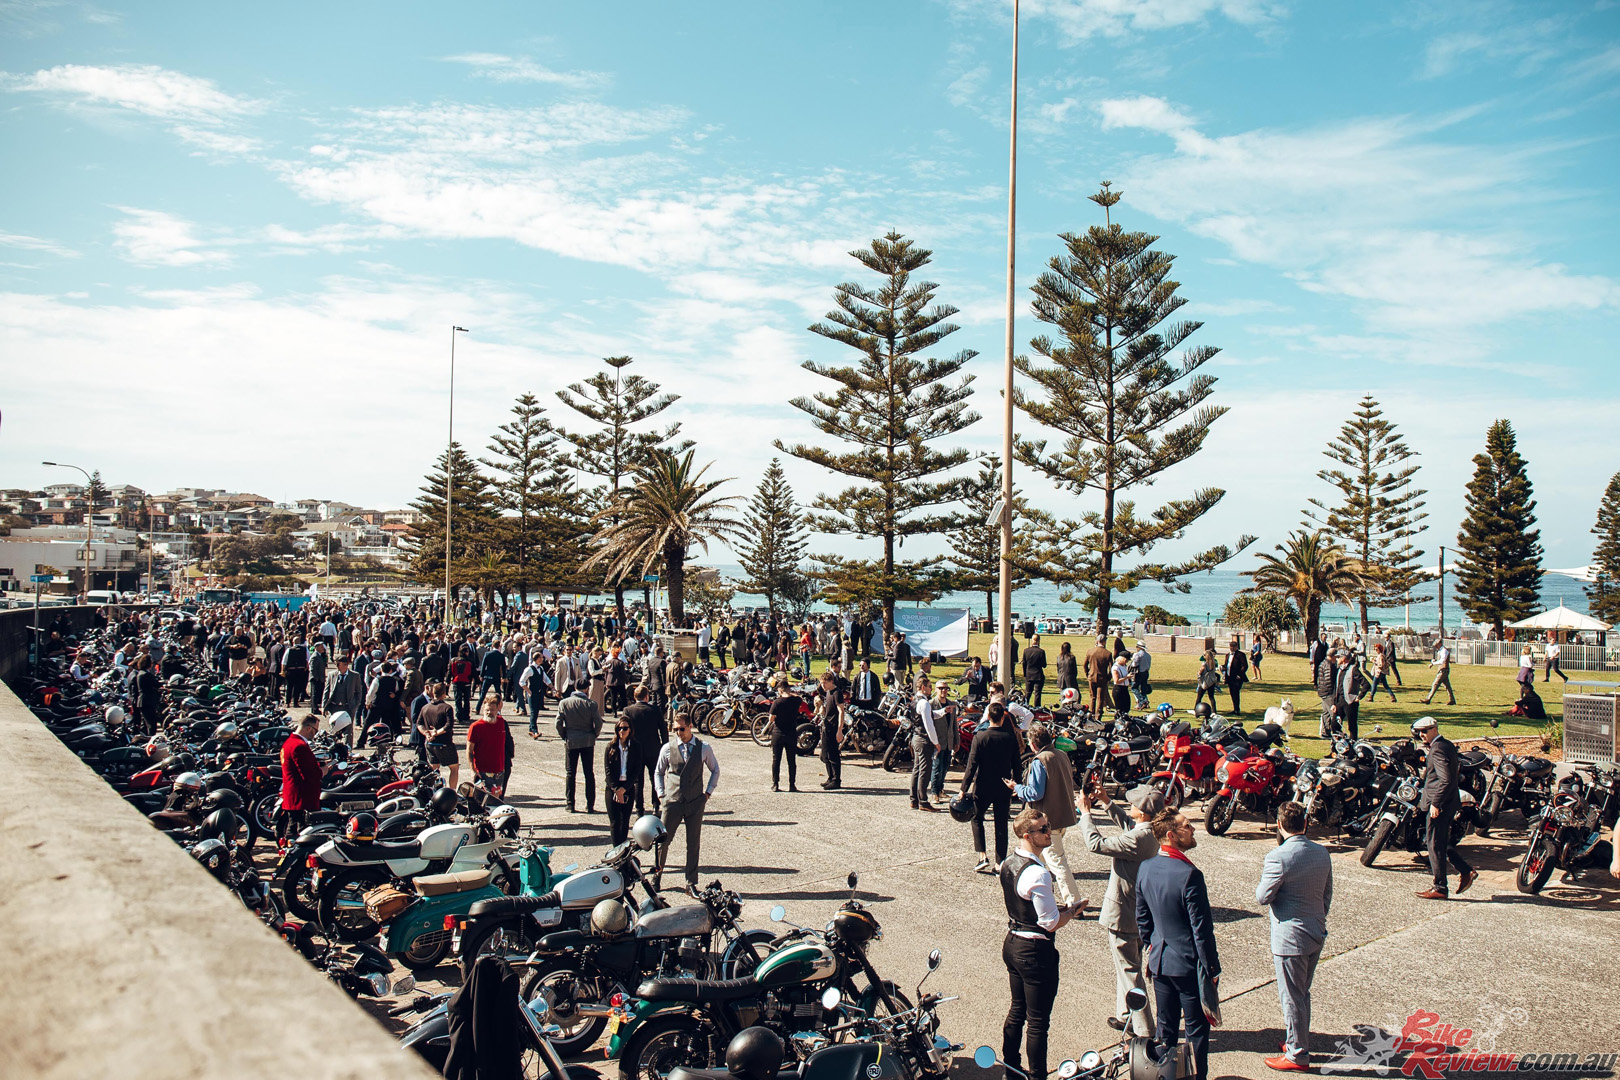 The Distinguished Gentleman’s Ride has a great turn out each year and is only growing as the world comes out of lockdown...